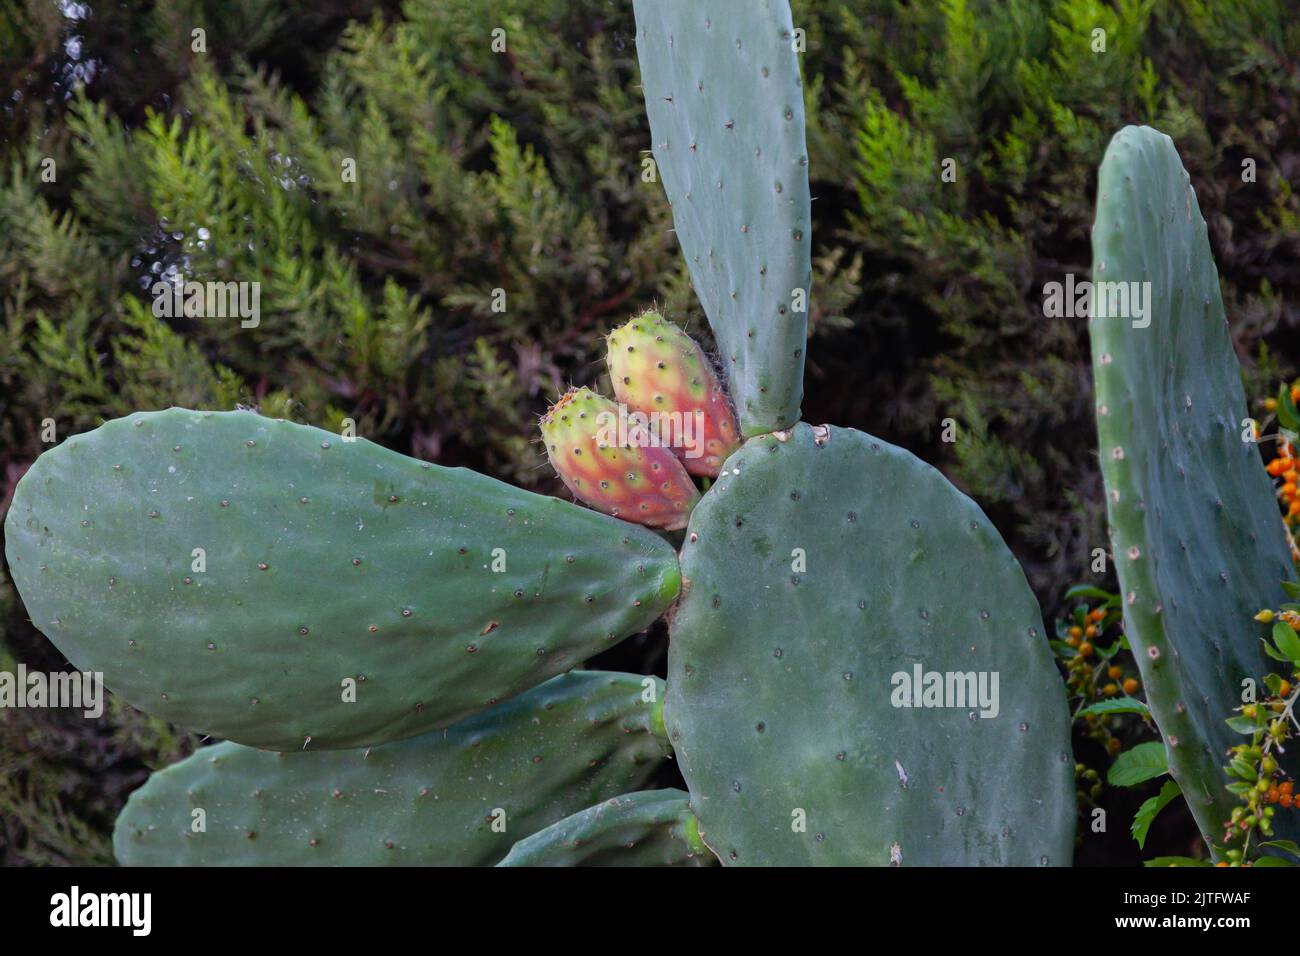 Prickly pear fig. Cactus fruits on the cactus leaf Stock Photo